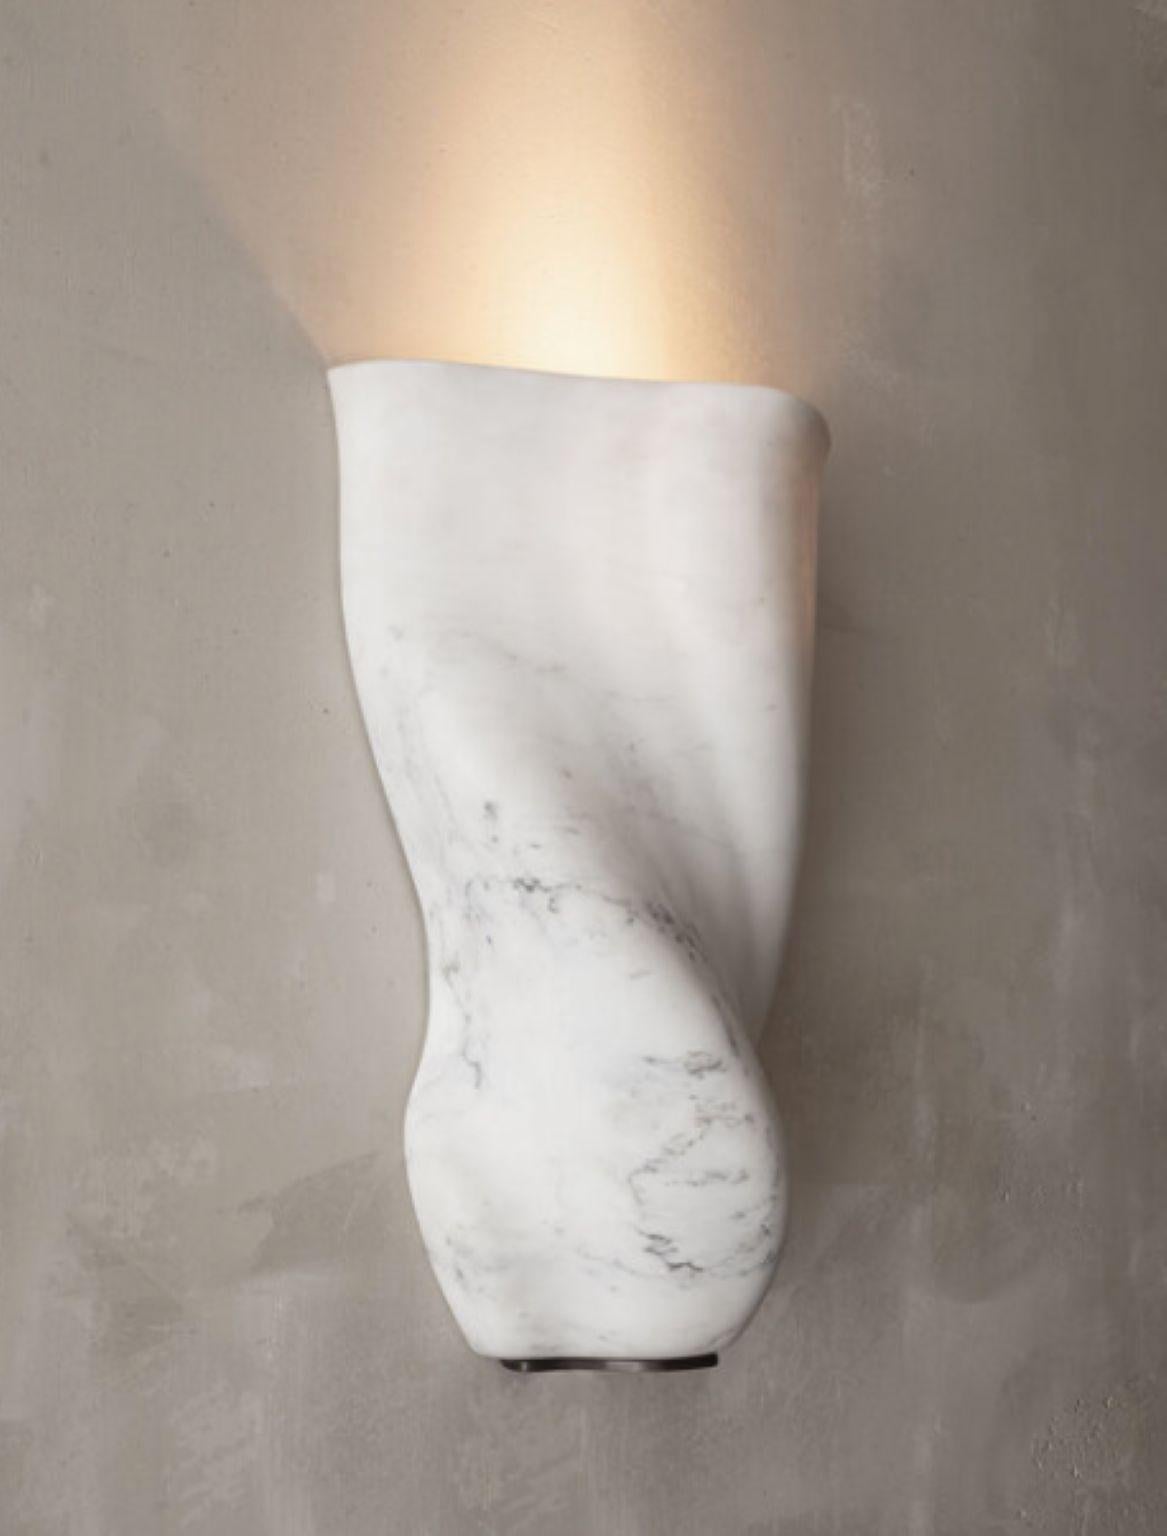 Wall marble sconces by Jonathan Hansen 
Dimensions: W 32 x D 15 x H 49.5 cm
Materials: Calacatta Marble


Series I Captum Biomorfe is a group of nine sculpture works created by New York artist Jonathan Hansen. Captum is a seized or captured